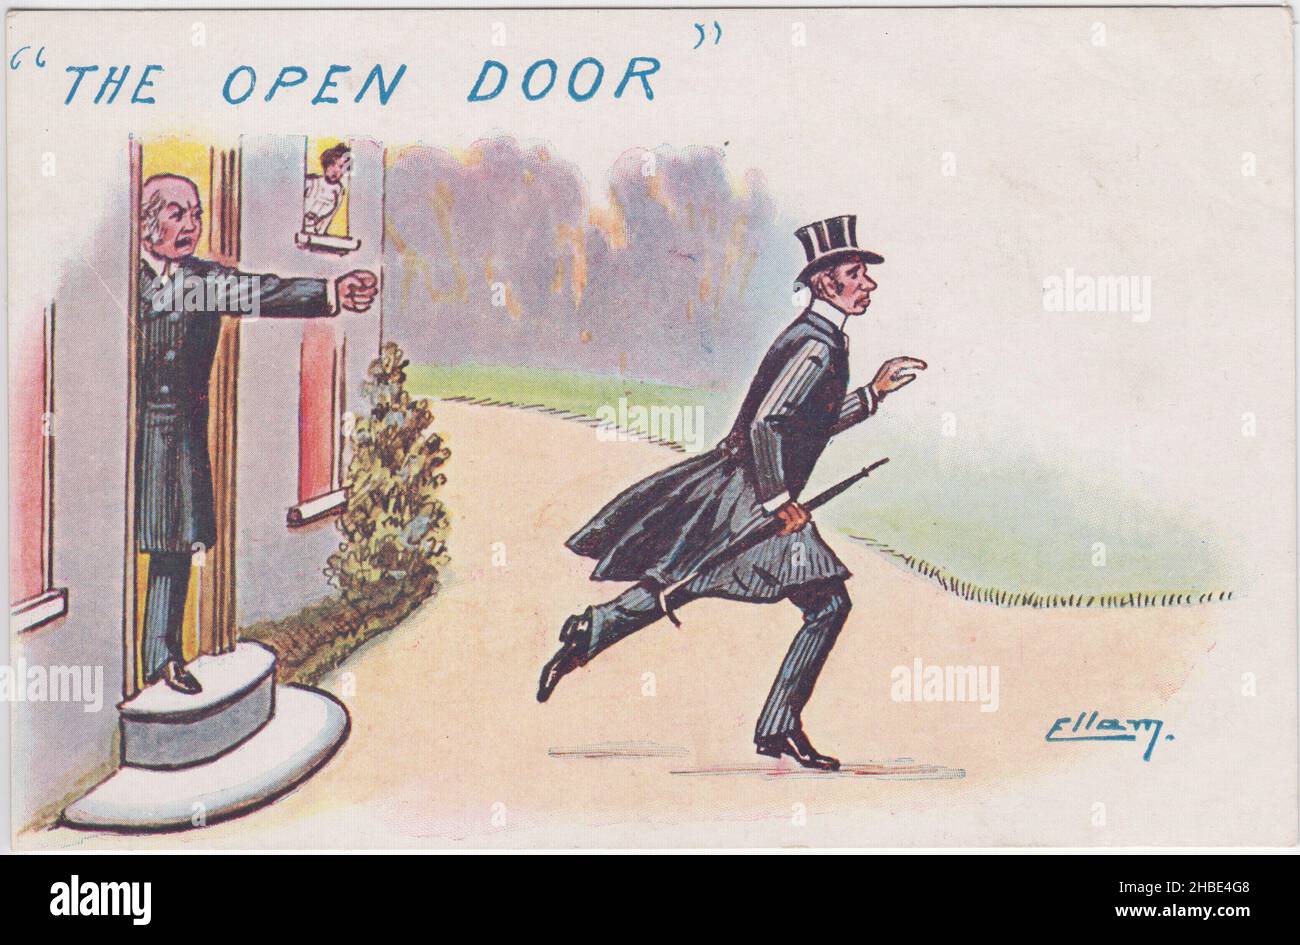 'The Open Door'. Cartoon showing a smartly dressed young man being thrown out of a house by an older man, a woman is looking out of a bedroom window. The postcard by William Henry Ellam (1858–1935) is one of a series in which he satirises the debate over free trade versus protectionism / tariff reform in the first decade of the 20th century - 'open door' is a reference to free trade Stock Photo